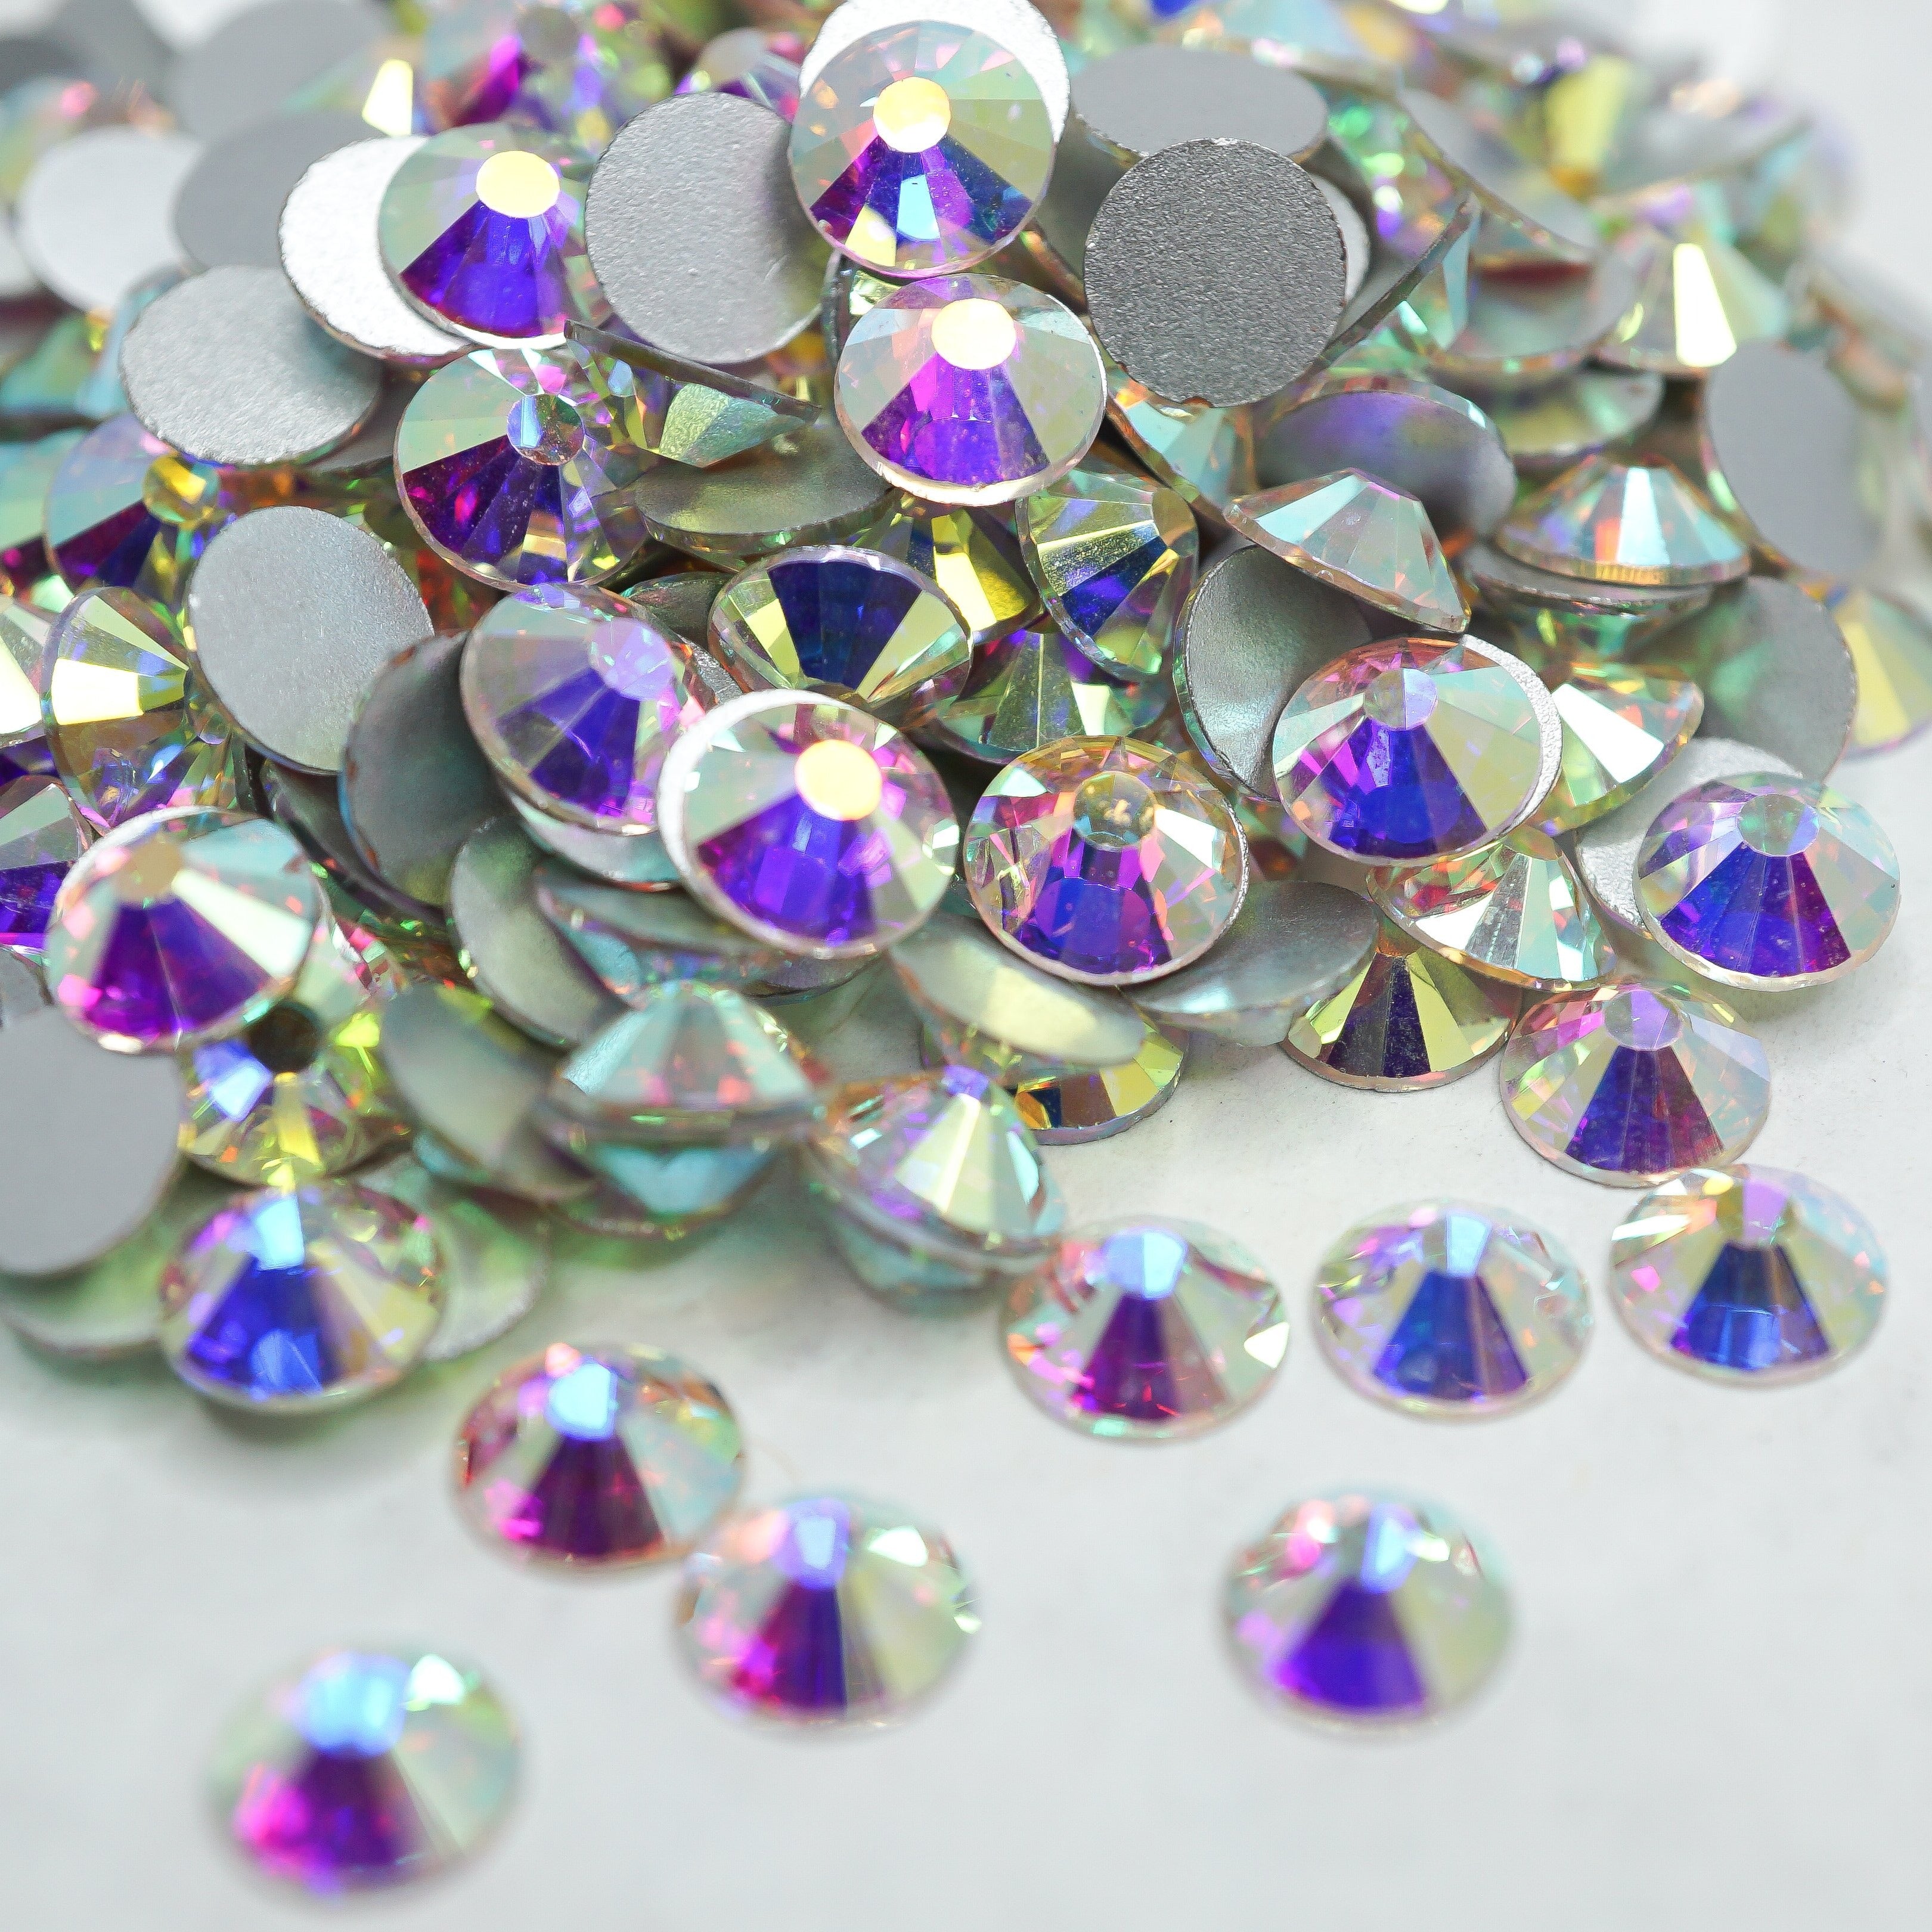 5A Quality1.4mm-10mm SS3-SS50 Rhinestones Crystal Color Crystal AB